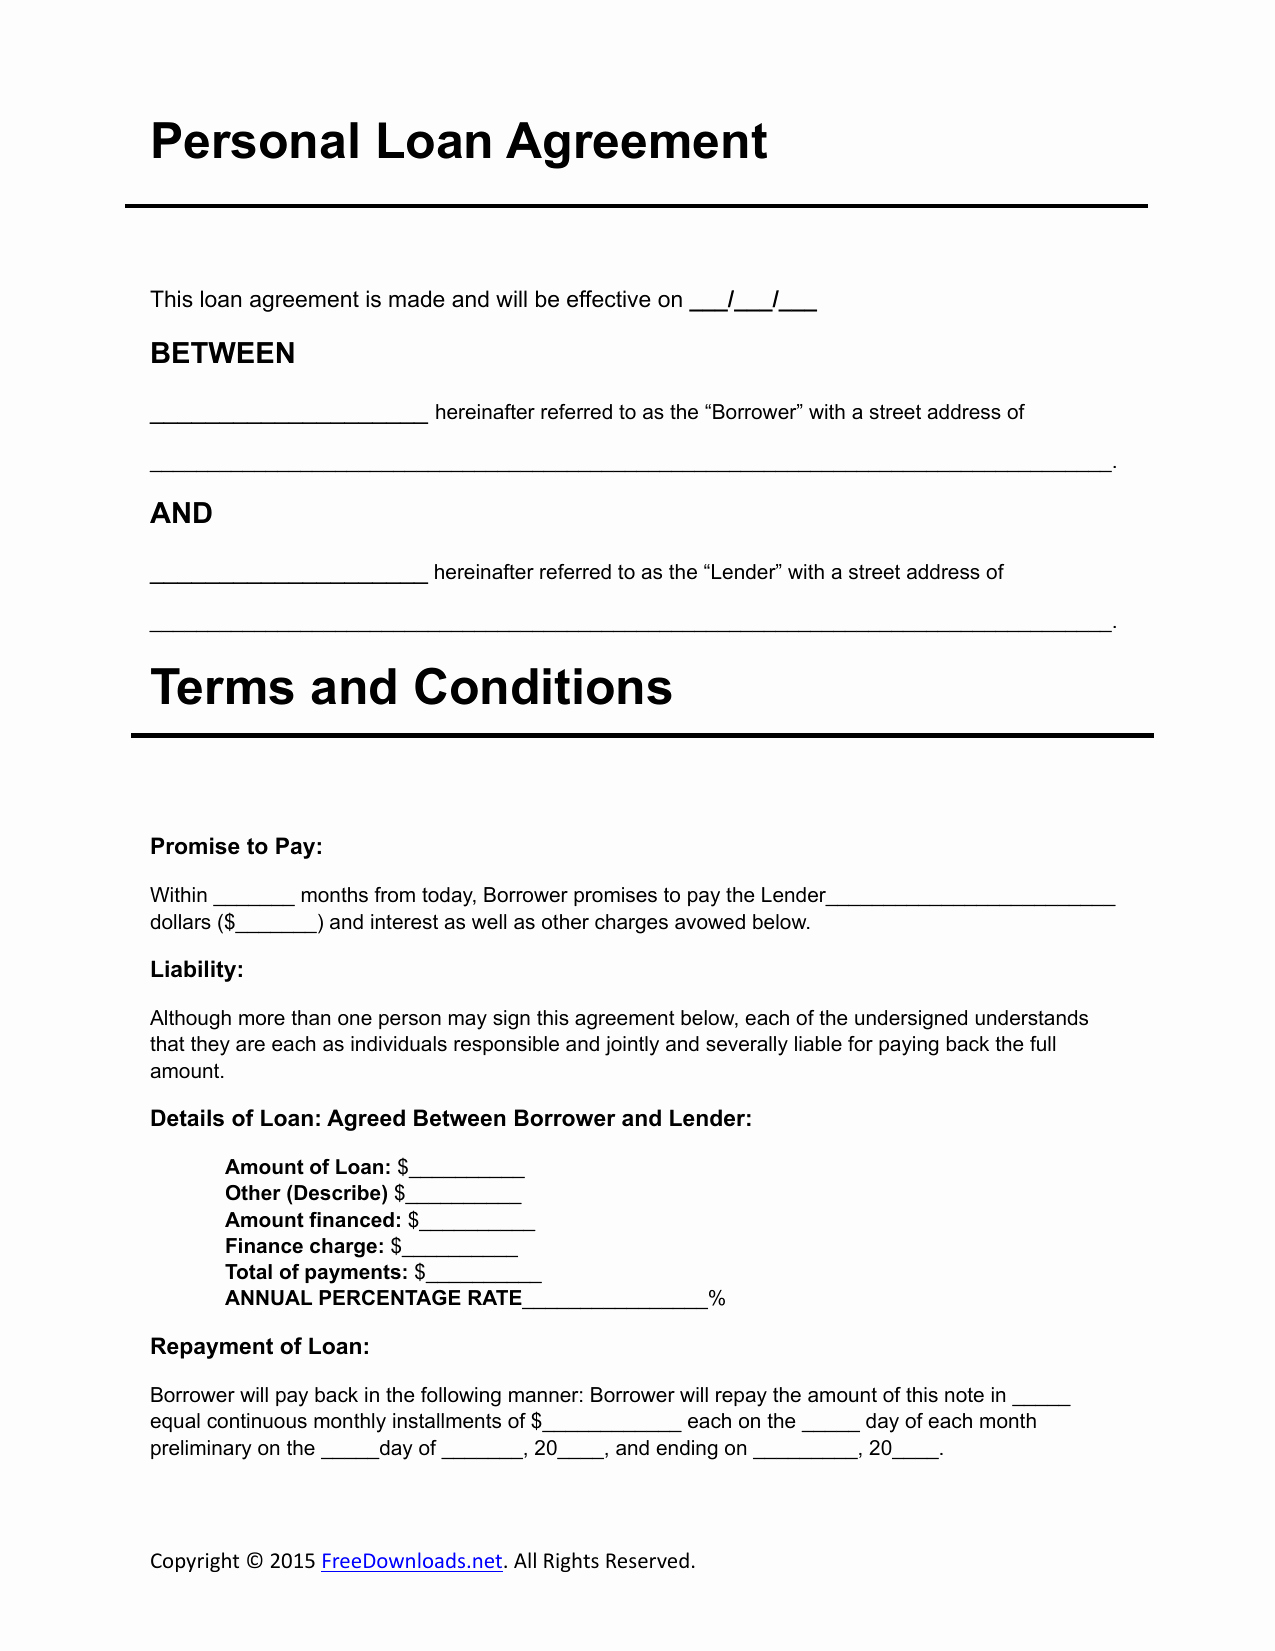 Template for Personal Loan Agreement Awesome Download Personal Loan Agreement Template Pdf